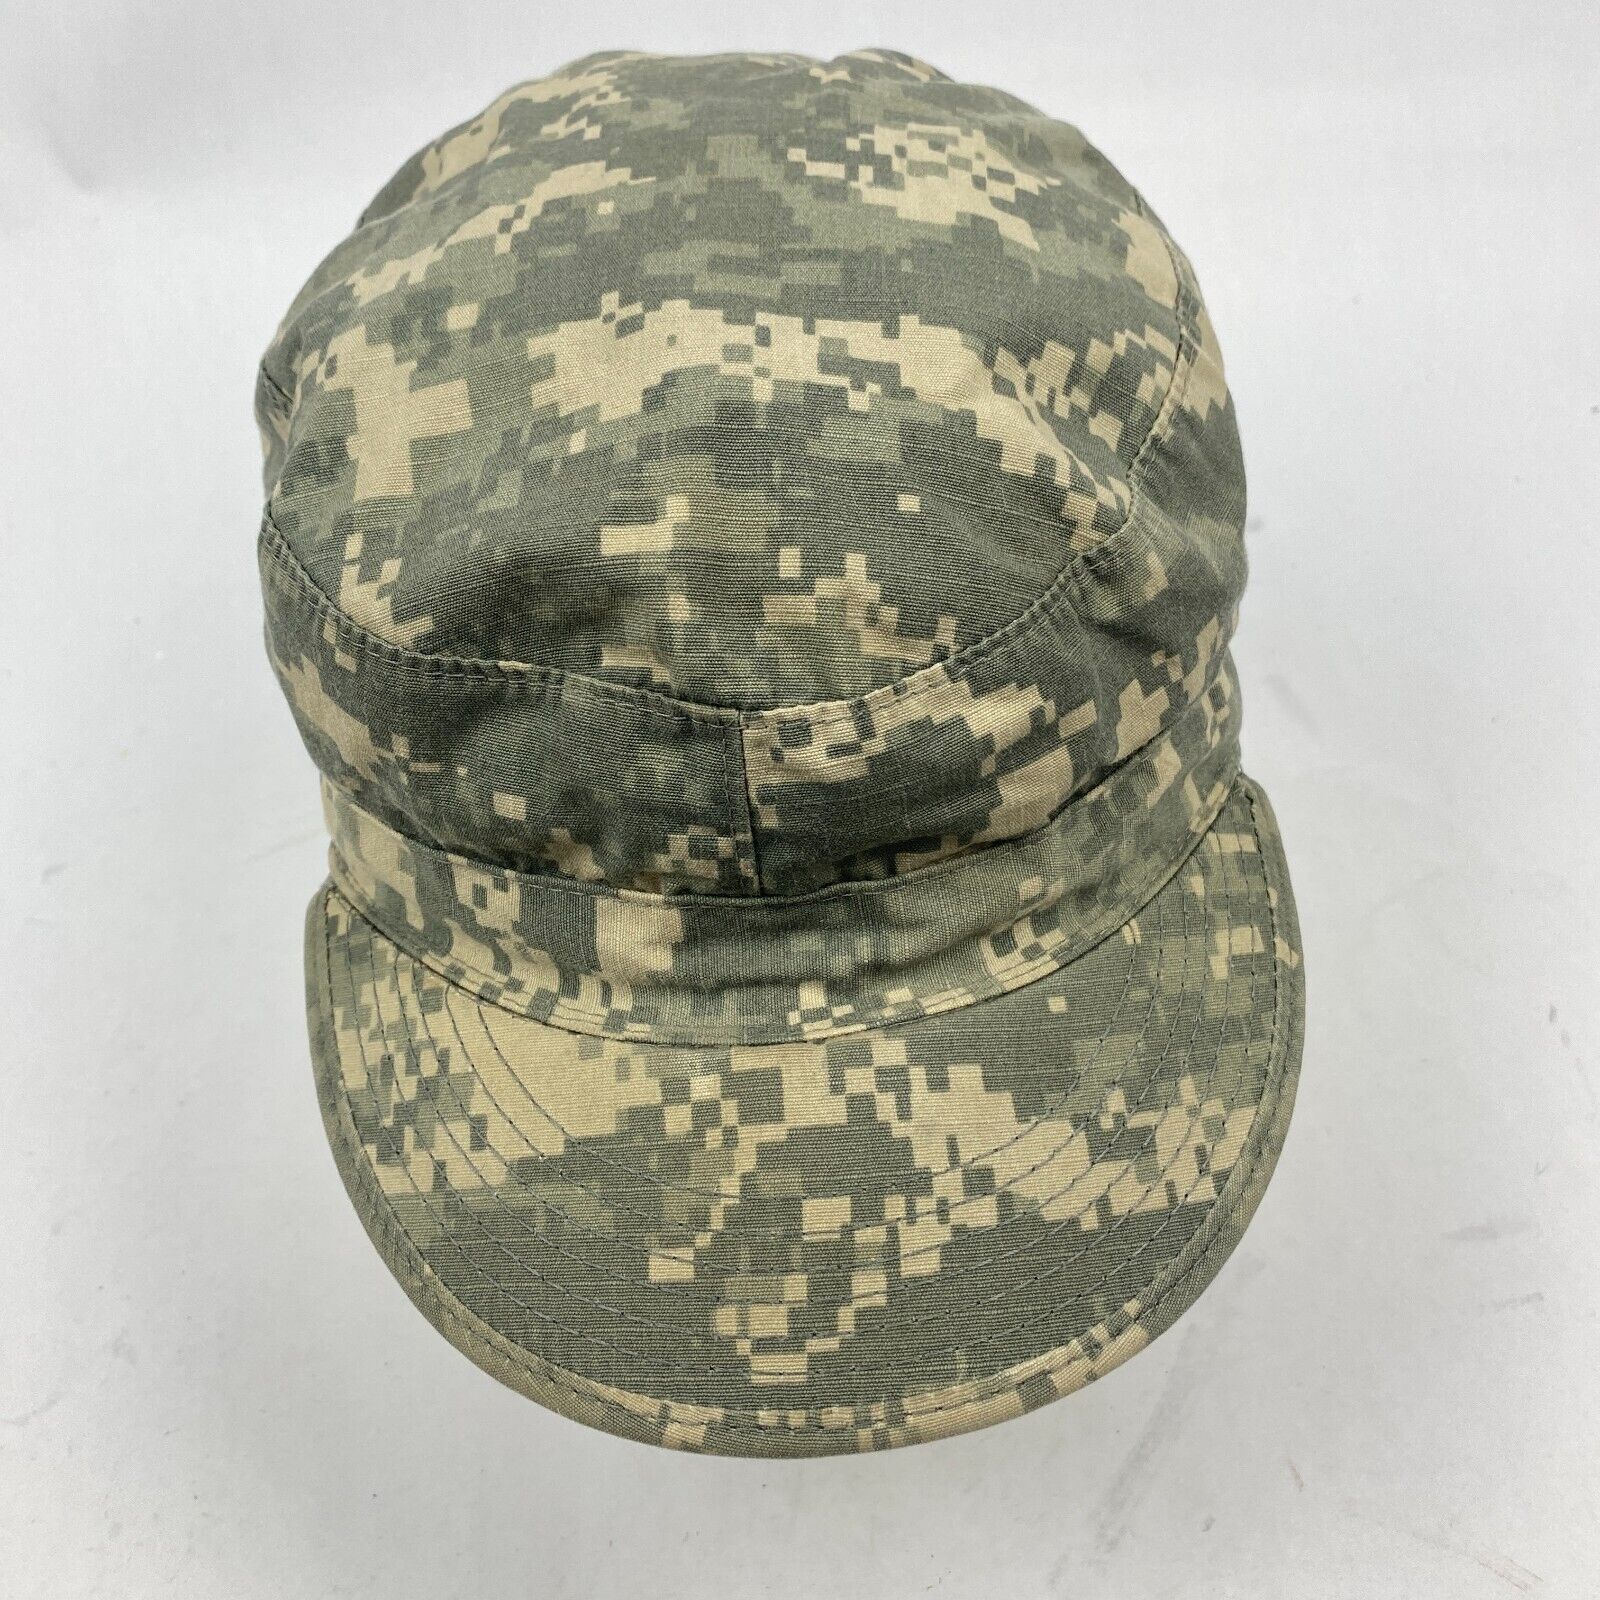 US Military Issue Army ACU Digital Ripstop Camouflage Patrol Cap Hat Size 7 1/2